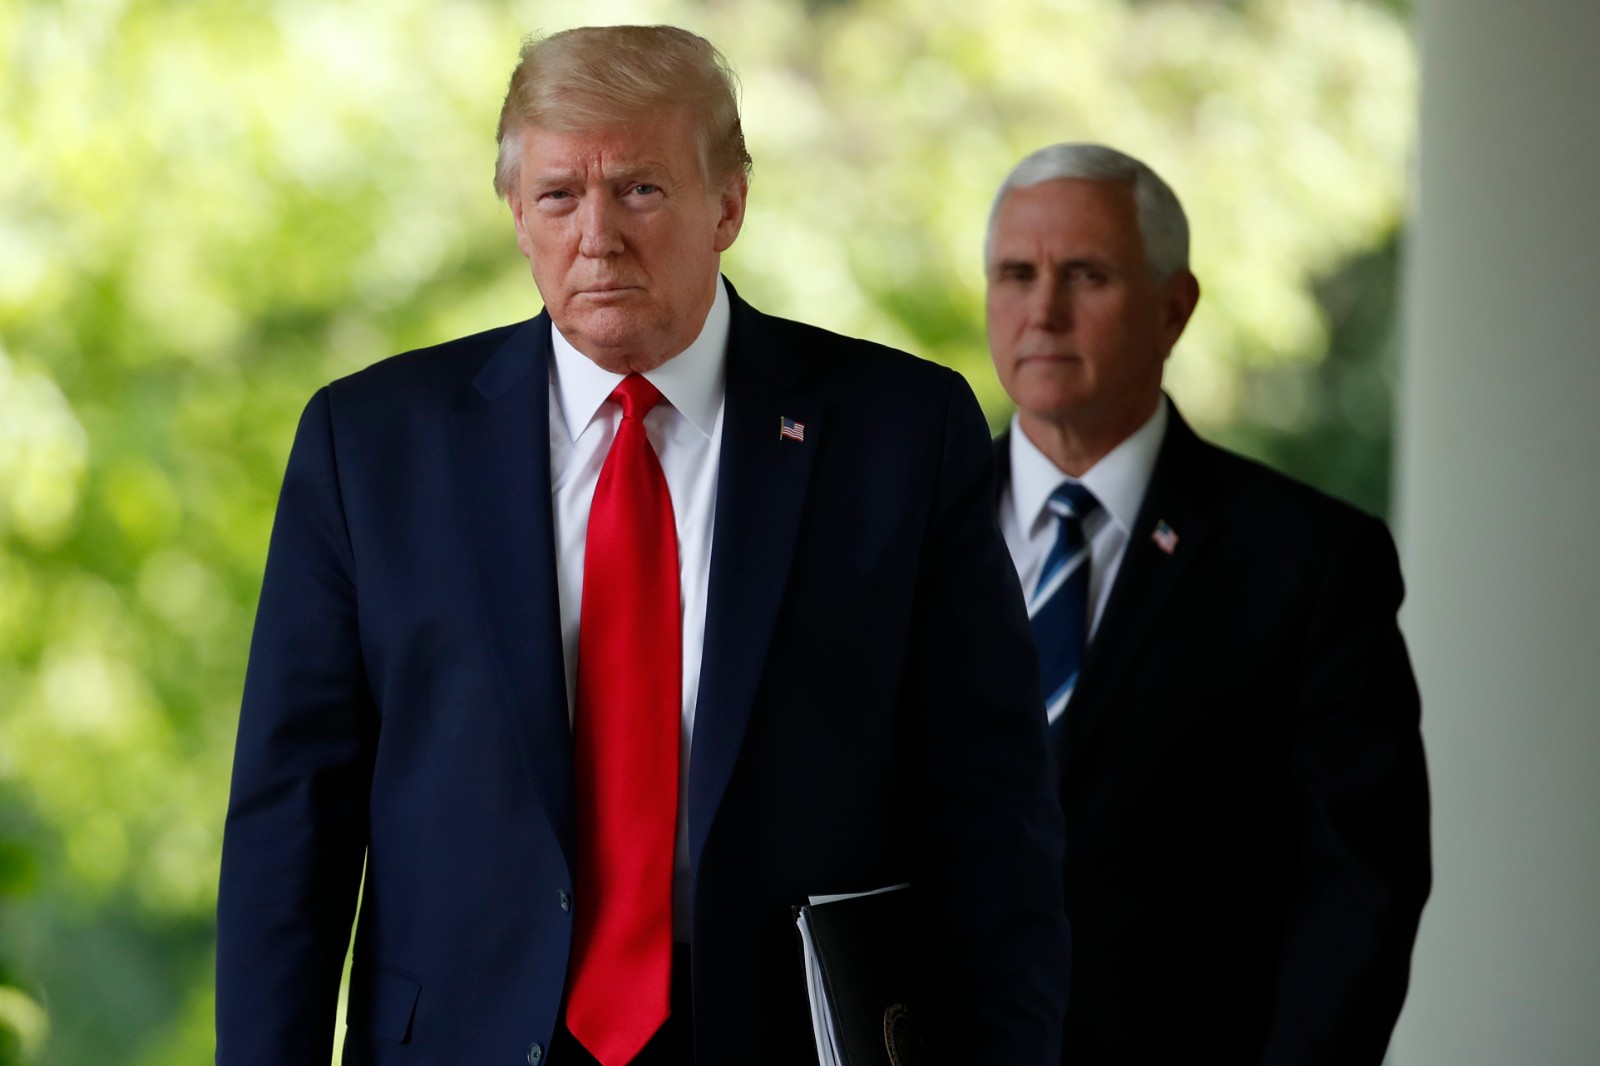 President Donald Trump and Vice President Mike Pence walk from the Oval Office to speak about the coronavirus in the Rose Garden of the White House, Monday, April 27, 2020, in Washington. (AP Photo/Alex Brandon)